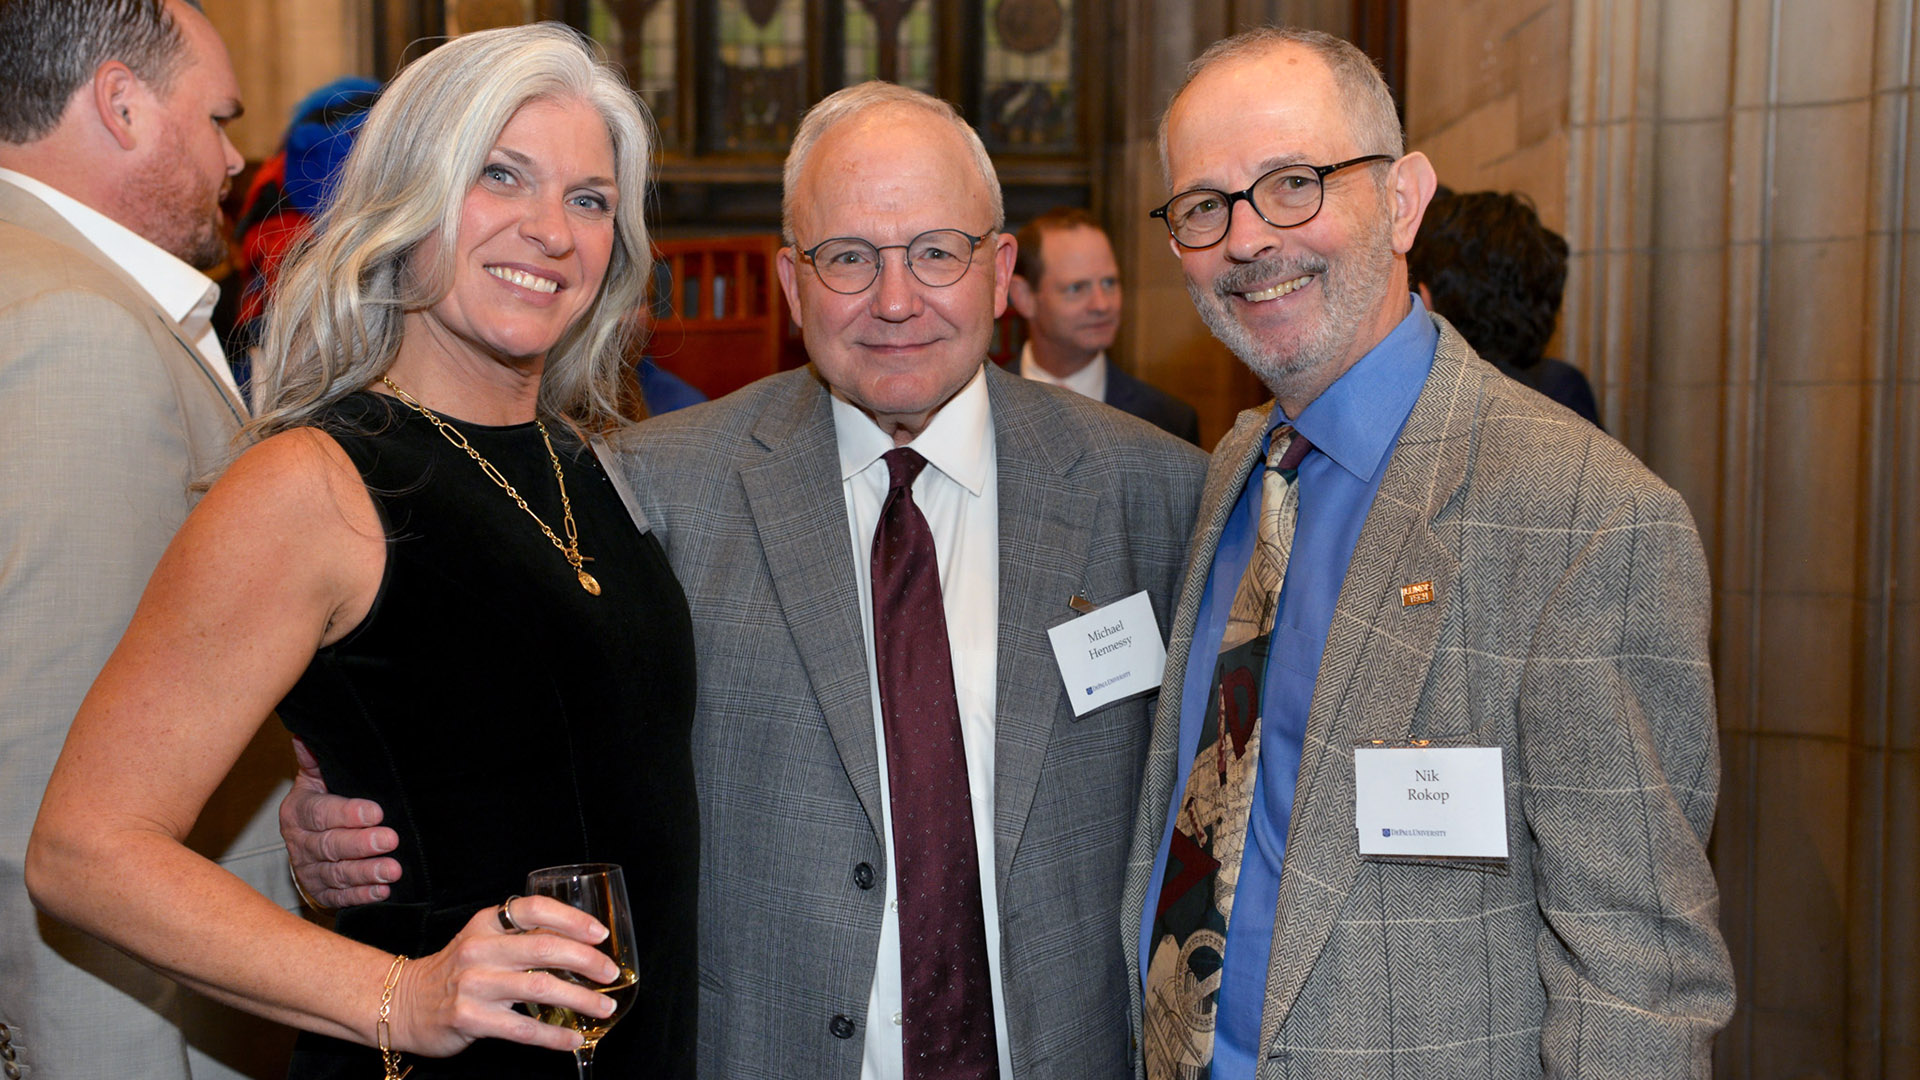 From left to right: President of USASBE Julienne Shields, Hennessy, and Rokop.